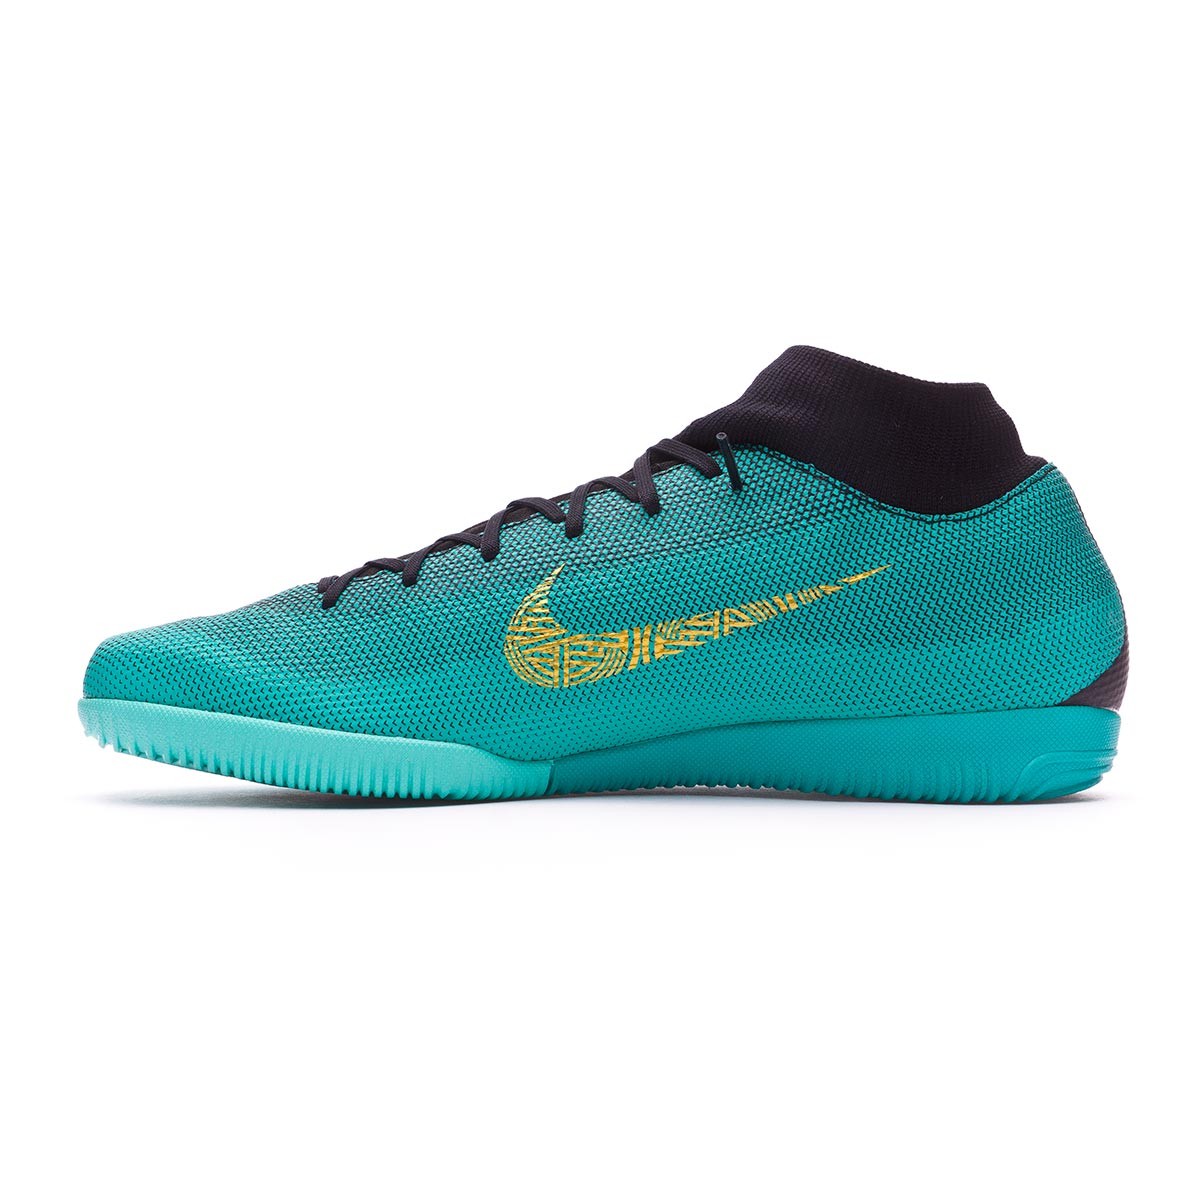 32++ Nike superflyx 6 academy cr7 indoor soccer shoes Trend